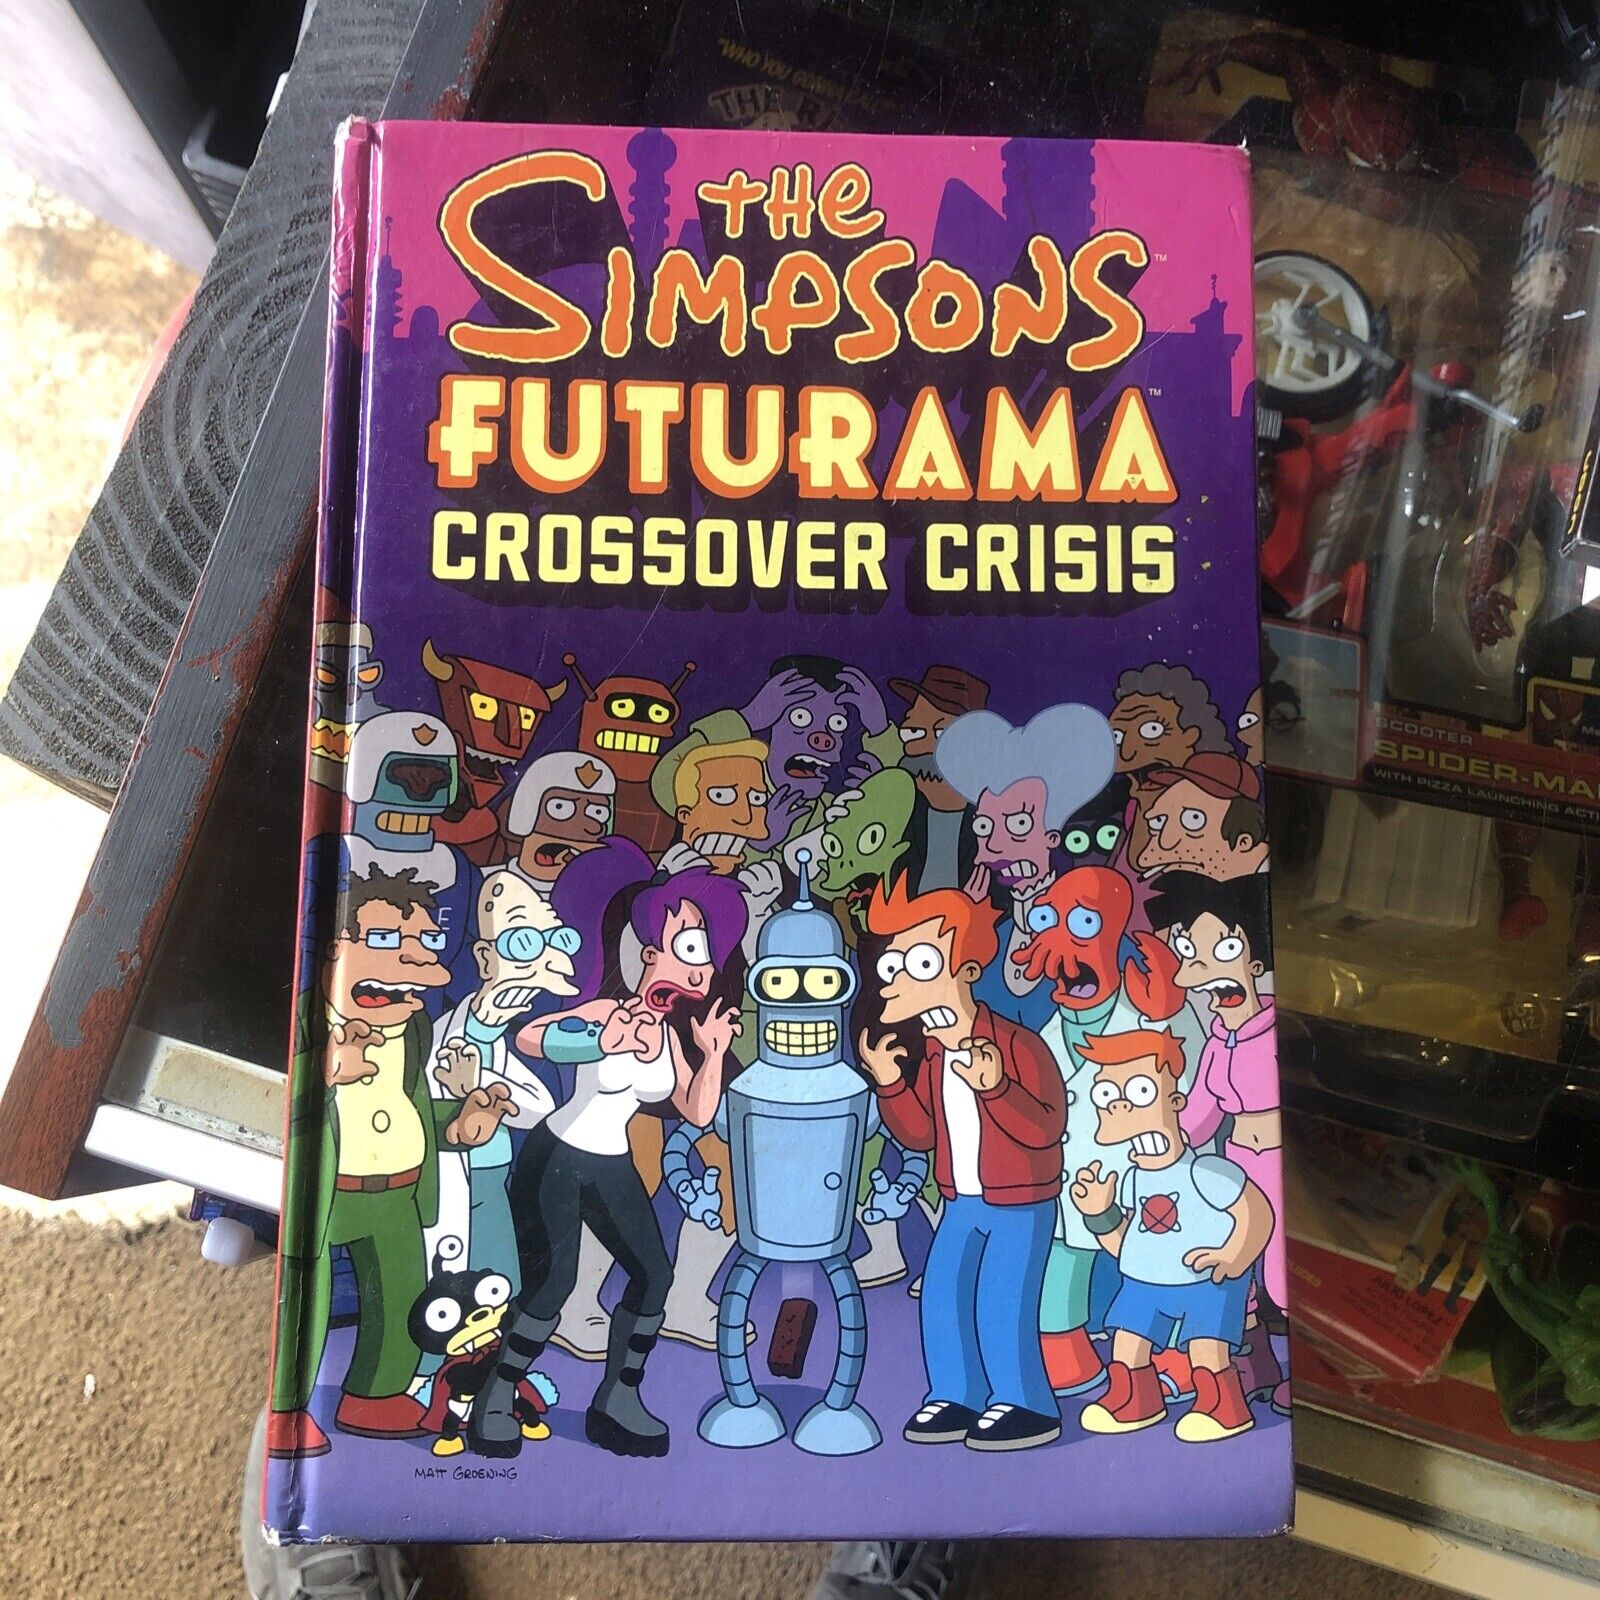 The Simpsons Futurama Crossover Crisis [With Out Collector\'s Item]